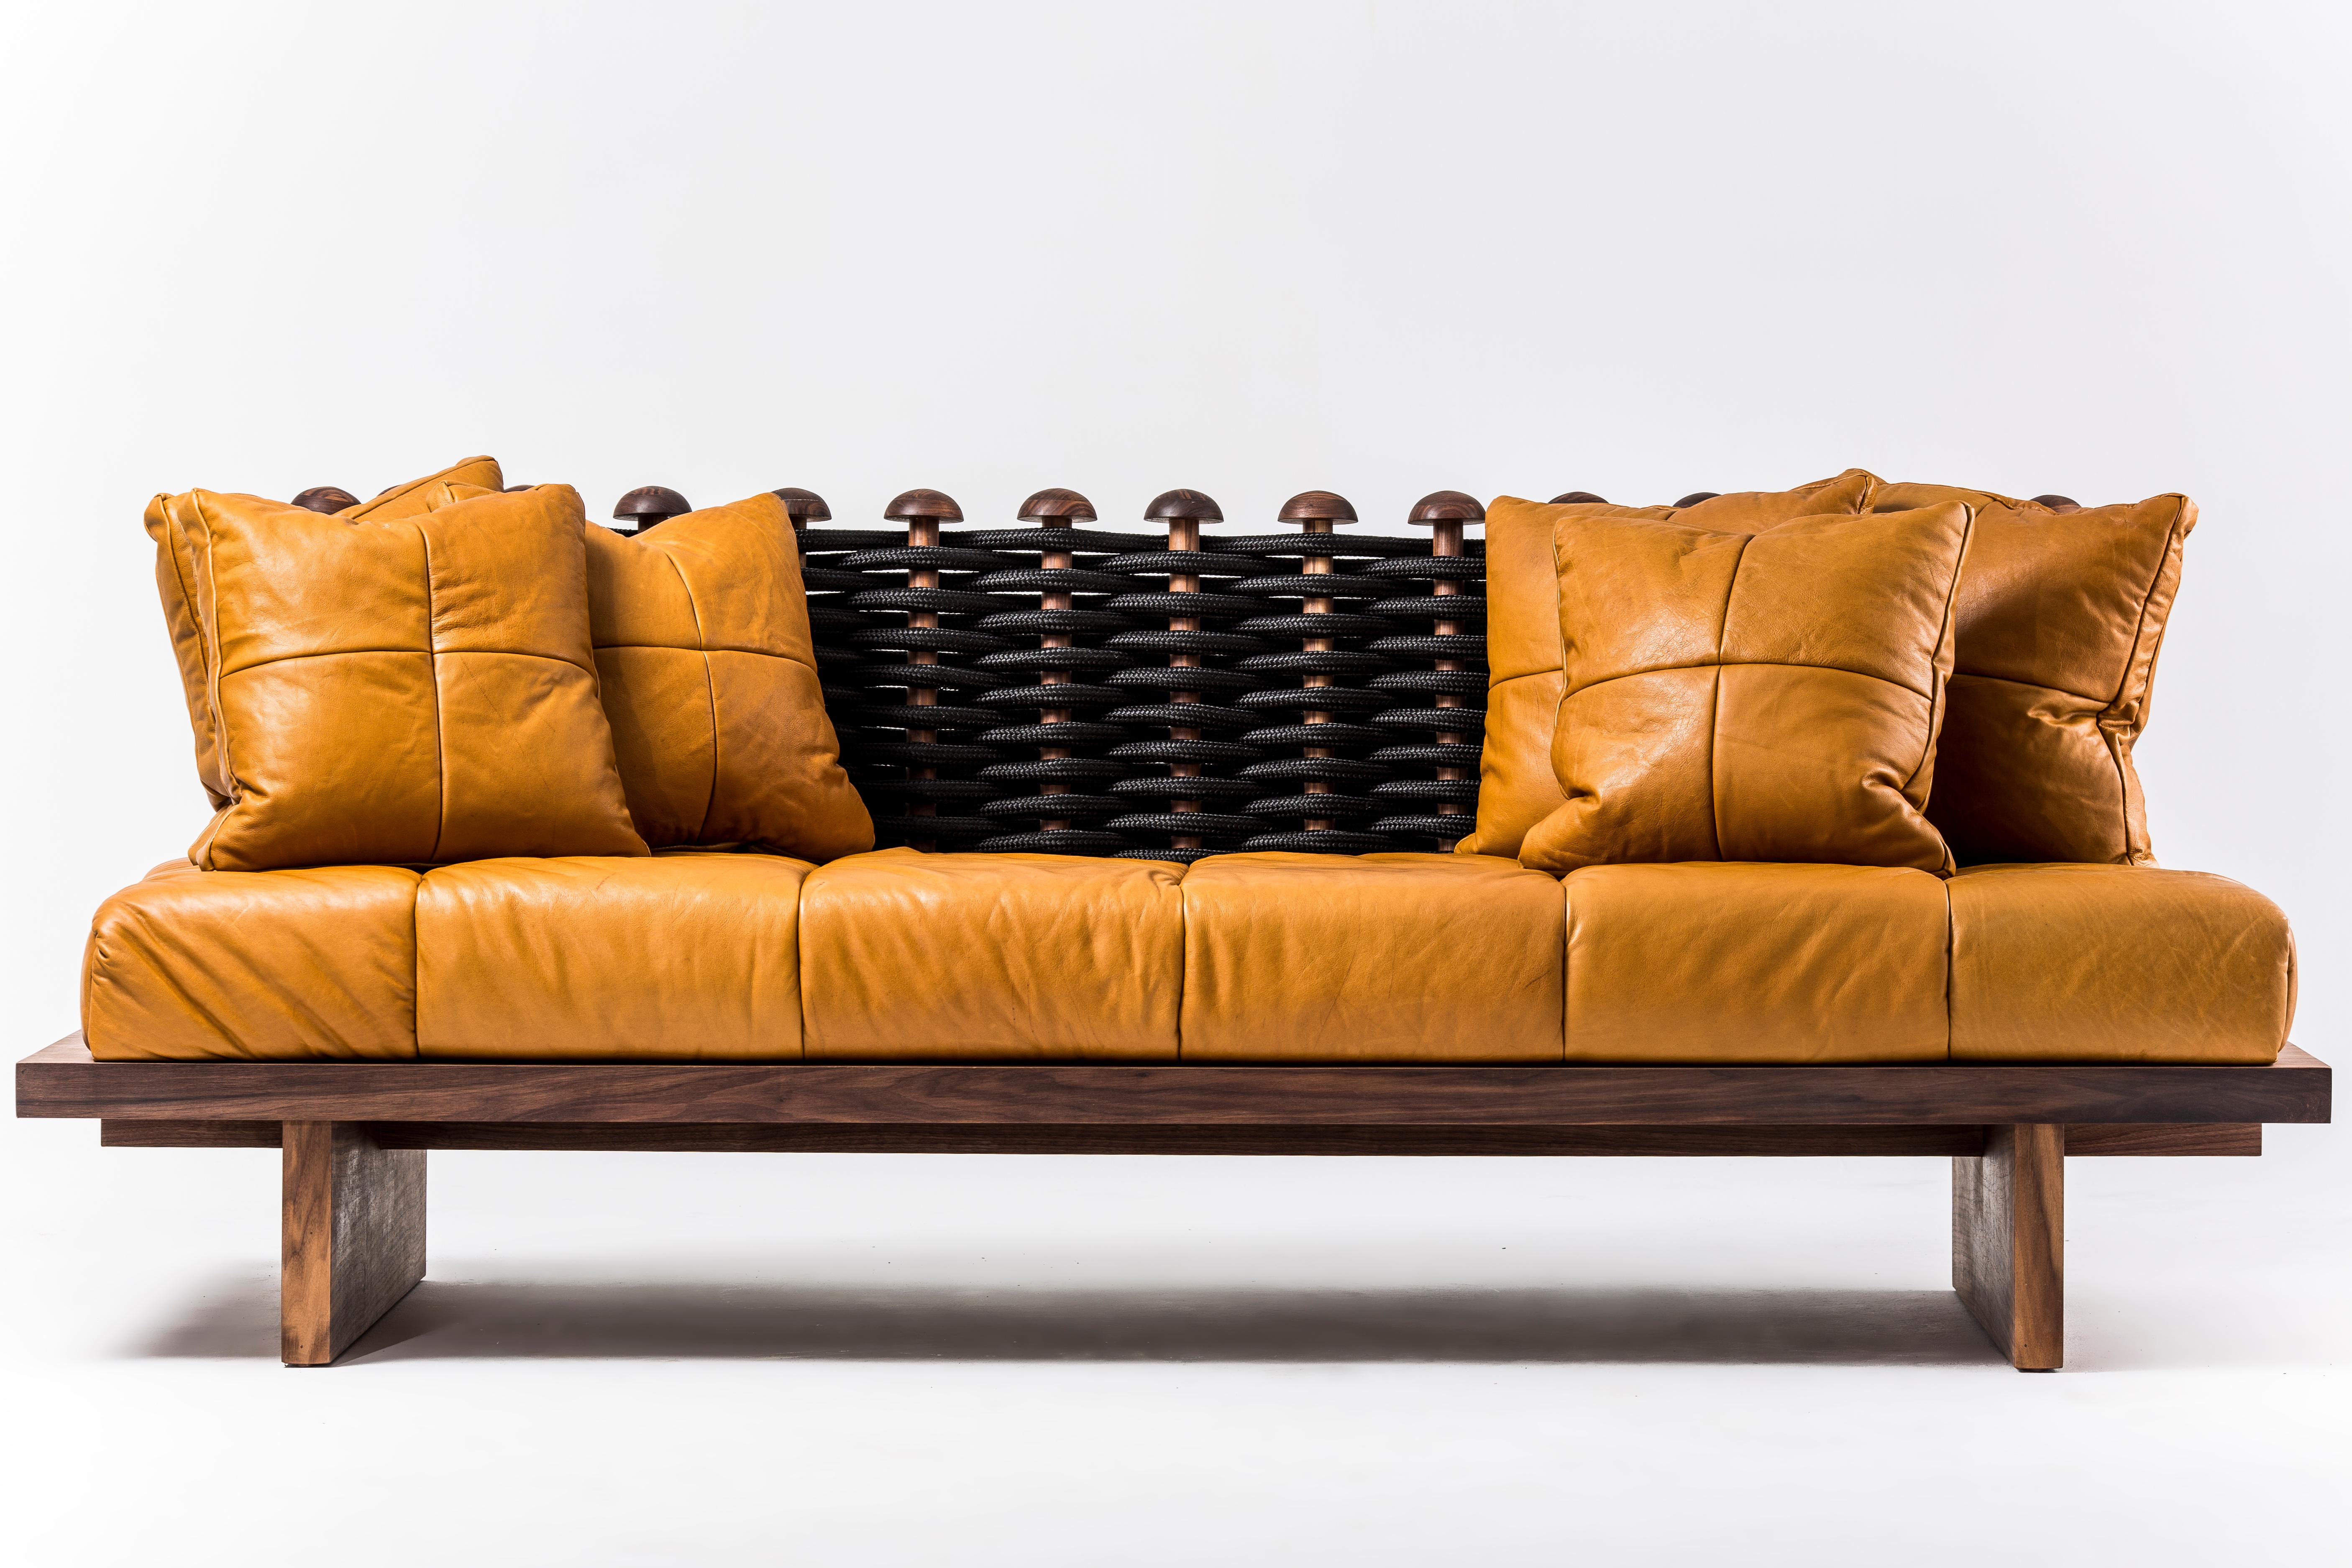 Shaker sofa by Egg Designs
Dimensions: 110 L X 240 D X 92.3 H cm
Materials: walnut timbe, nylon rope, leather upholstry

Founded by South Africans and life partners, Greg and Roche Dry - Egg is a unique perspective in contemporary furniture inspired